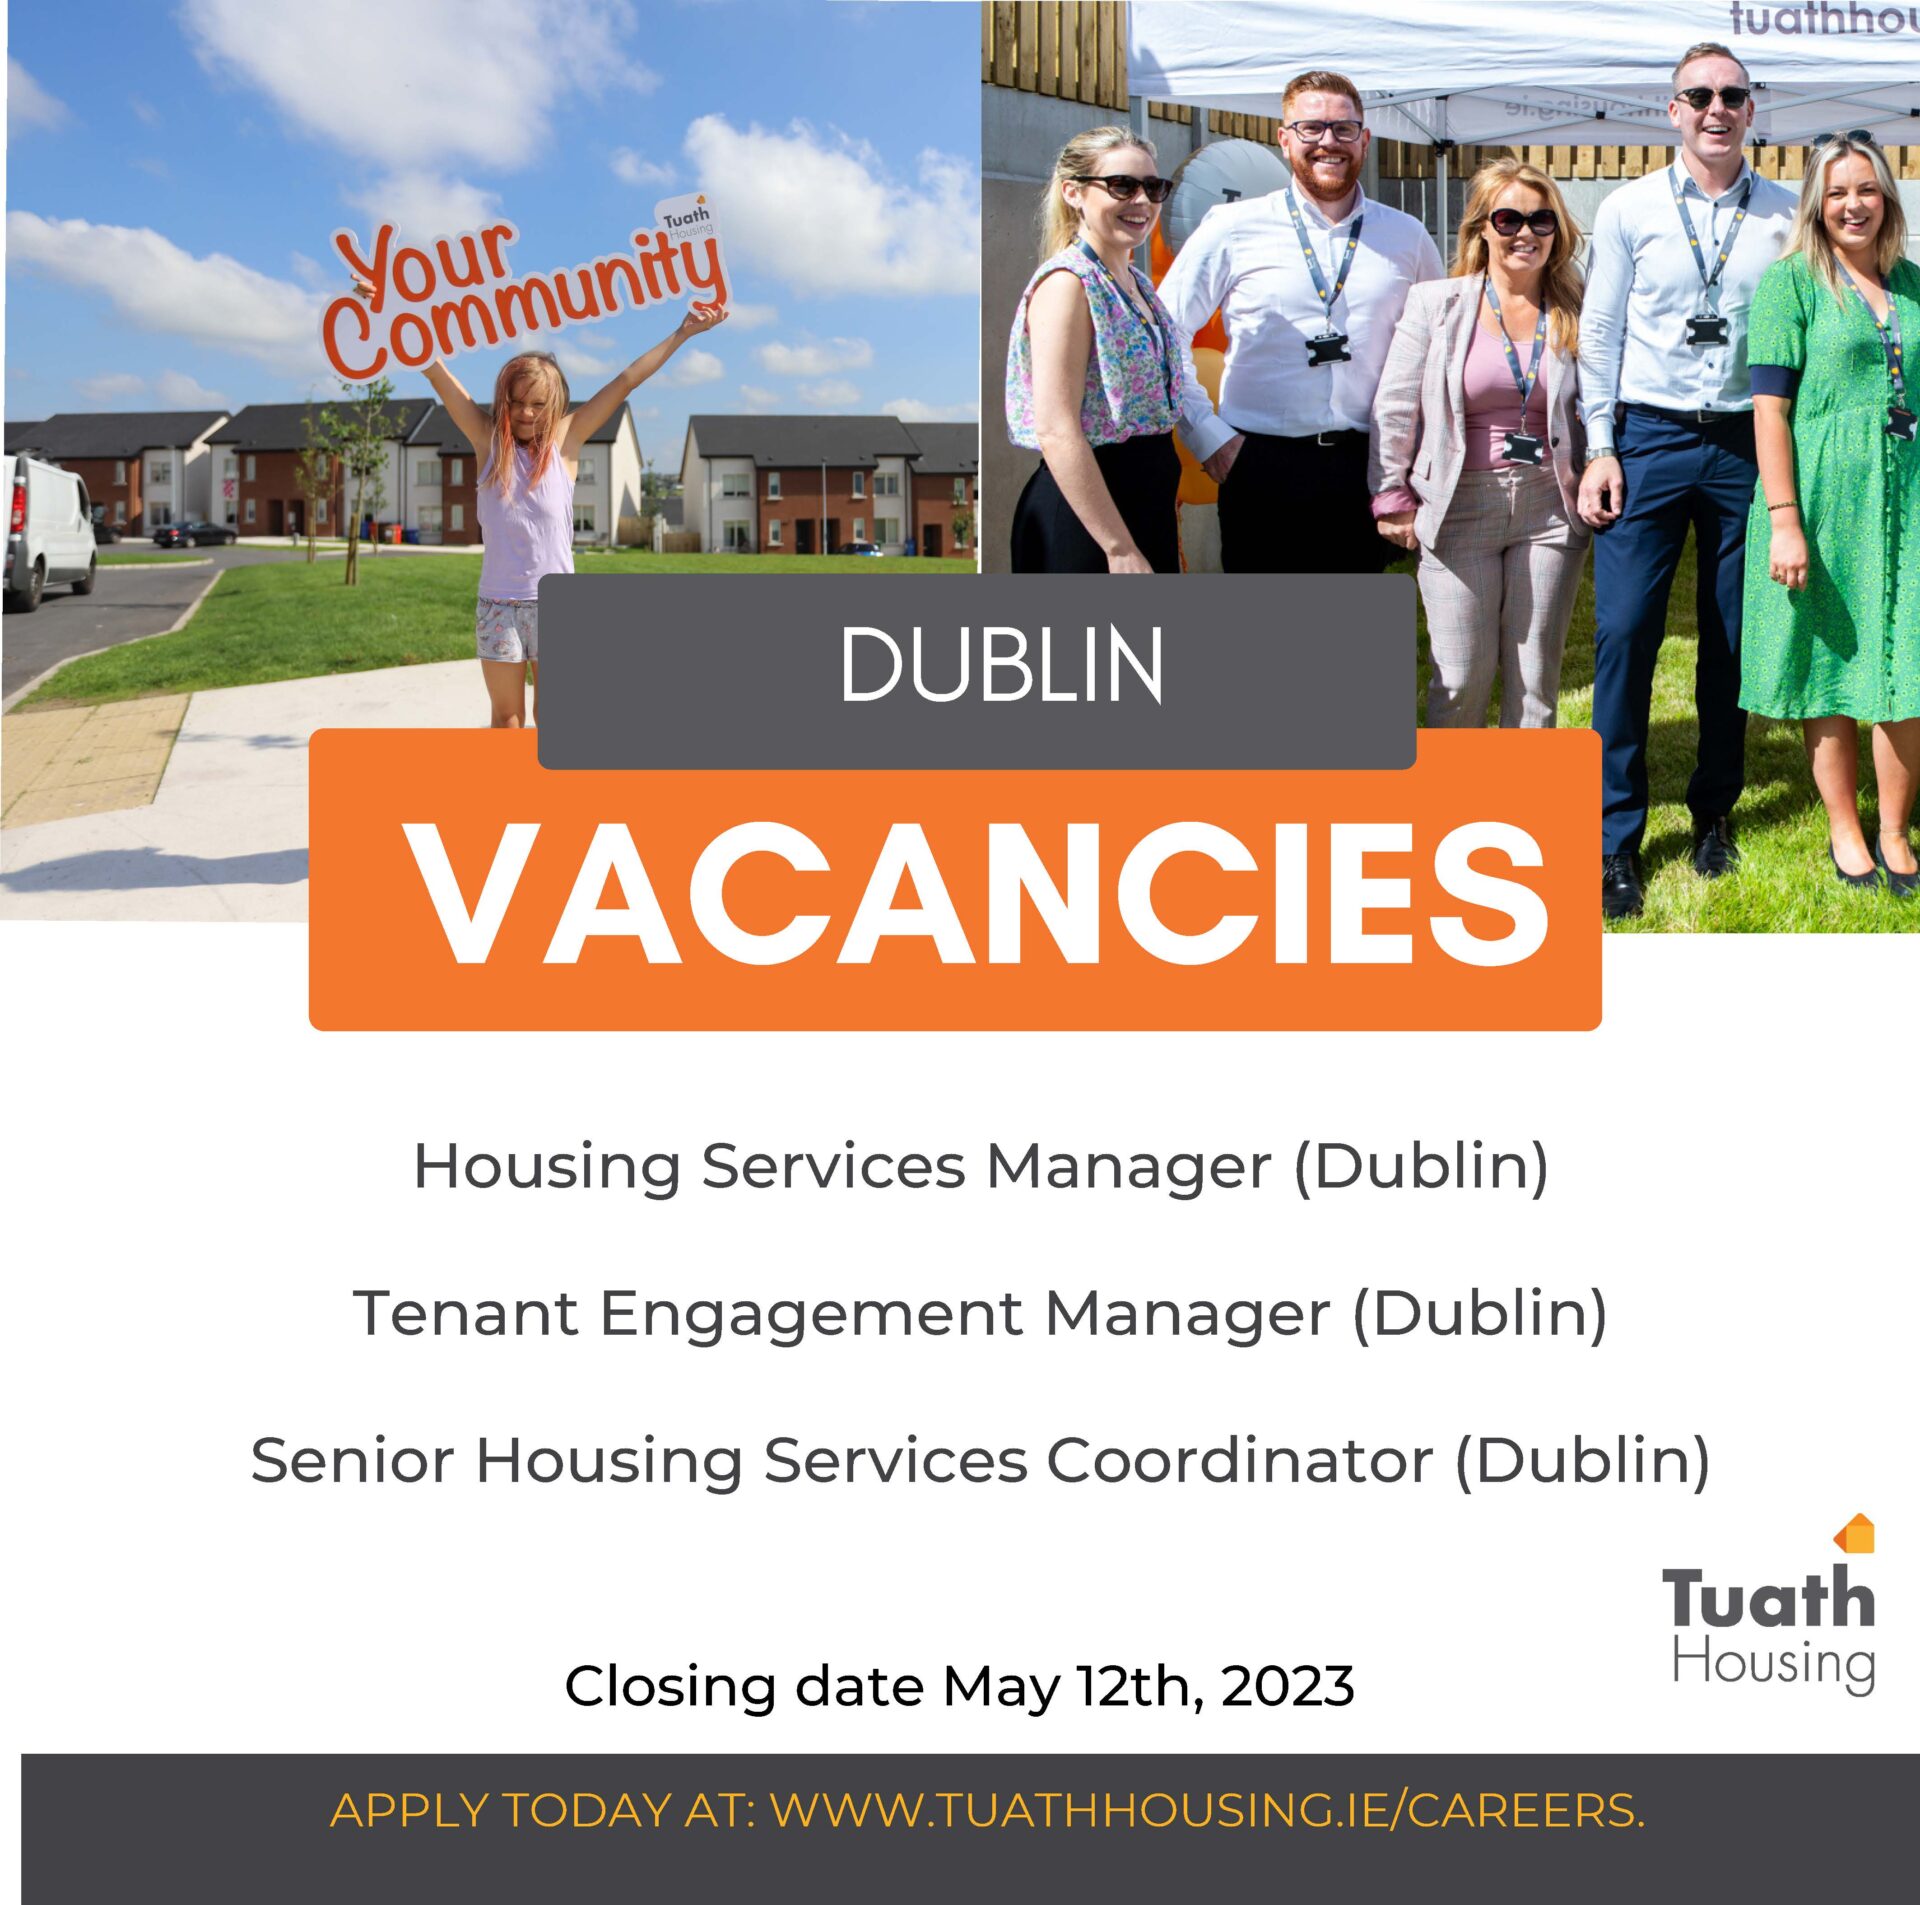 Dublin Vacancies 
Housing Services Manager (Dublin) 
Tenant Engagement Manager (Dublin) 
Senior Housing Services Coordinator (Dublin) 
Closing date May 12th,2023
Apply Today At: www.tuathhousing.ie/careers